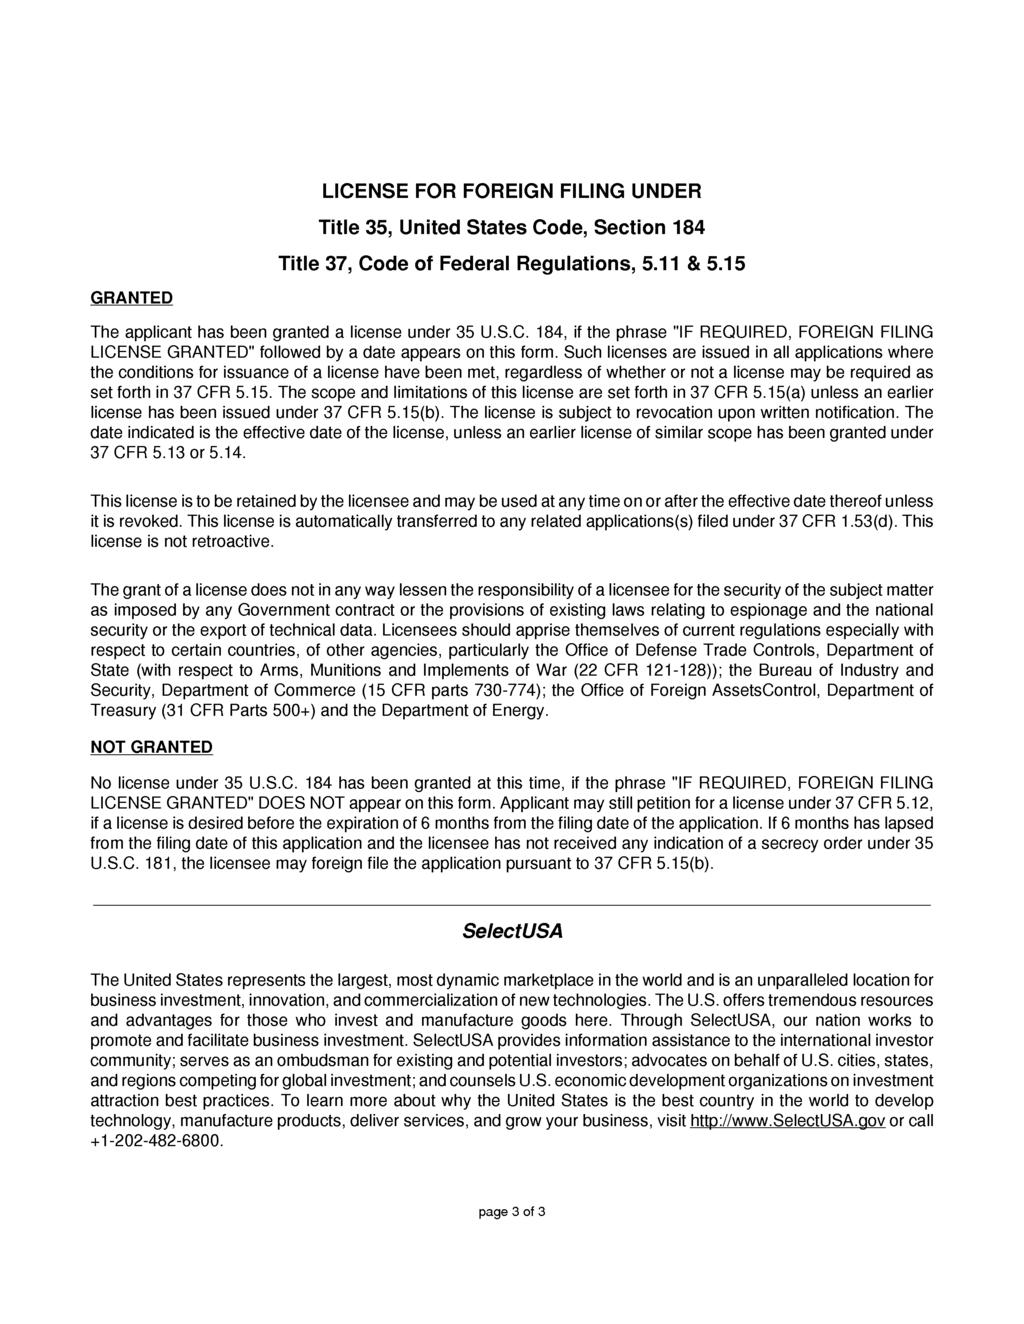 LICENSE FOR FOREIGN FILING UNDER Title 35, United States Code, Section 184 Title 37, Code of Federal Regulations, 5.11 & 5.15 GRANTED The applicant has been granted a license under 35 U.S.C. 184, if the phrase "IF REQUIRED, FOREIGN FILING LICENSE GRANTED" followed by a date appears on this form.